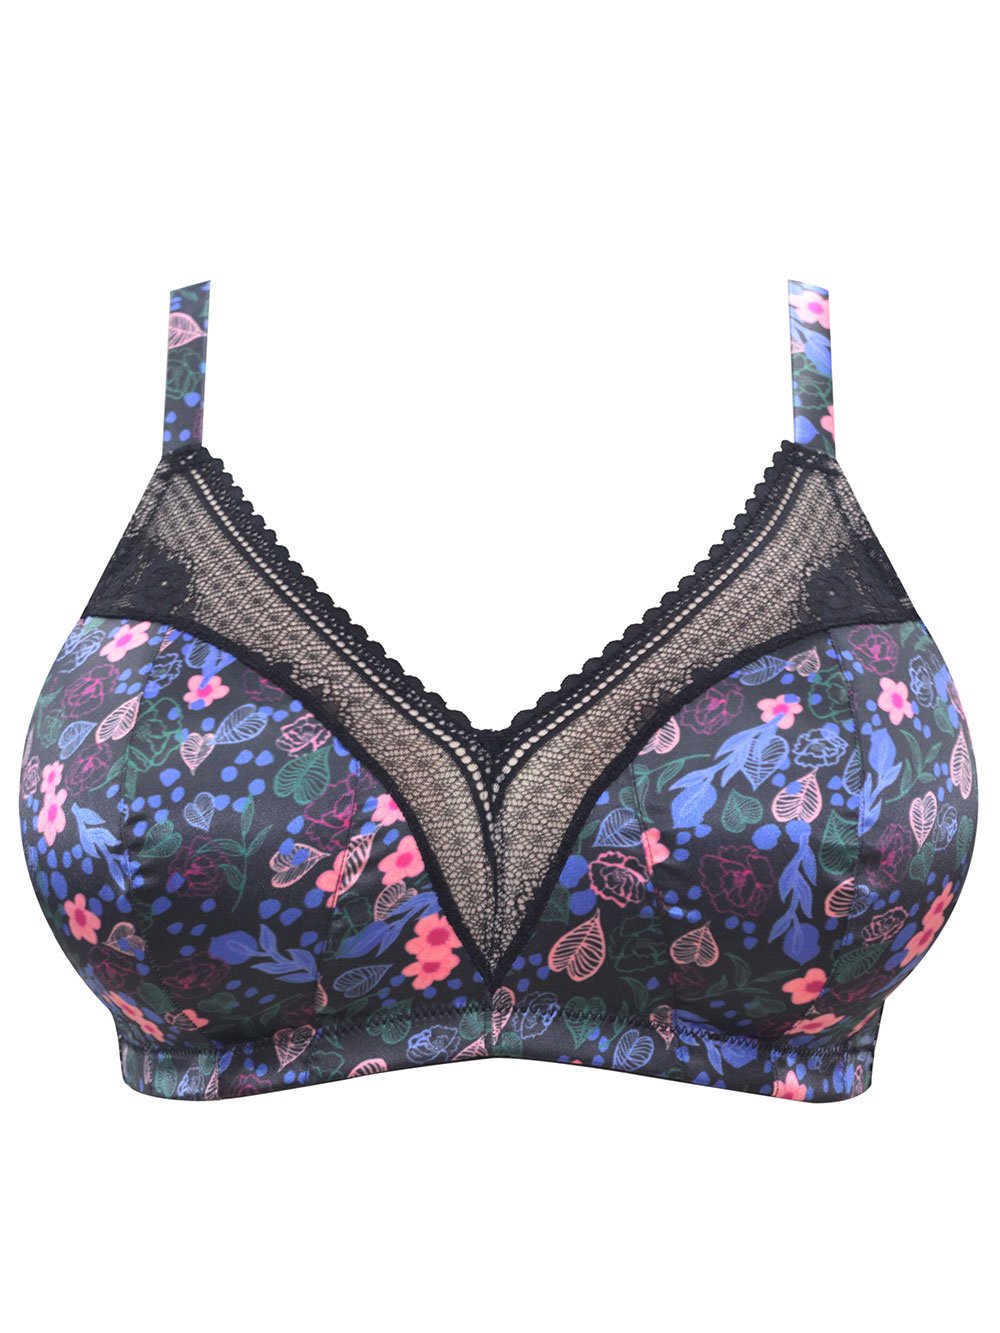 Buy Navy Floral Lace Underwired Bra 34A, Bras